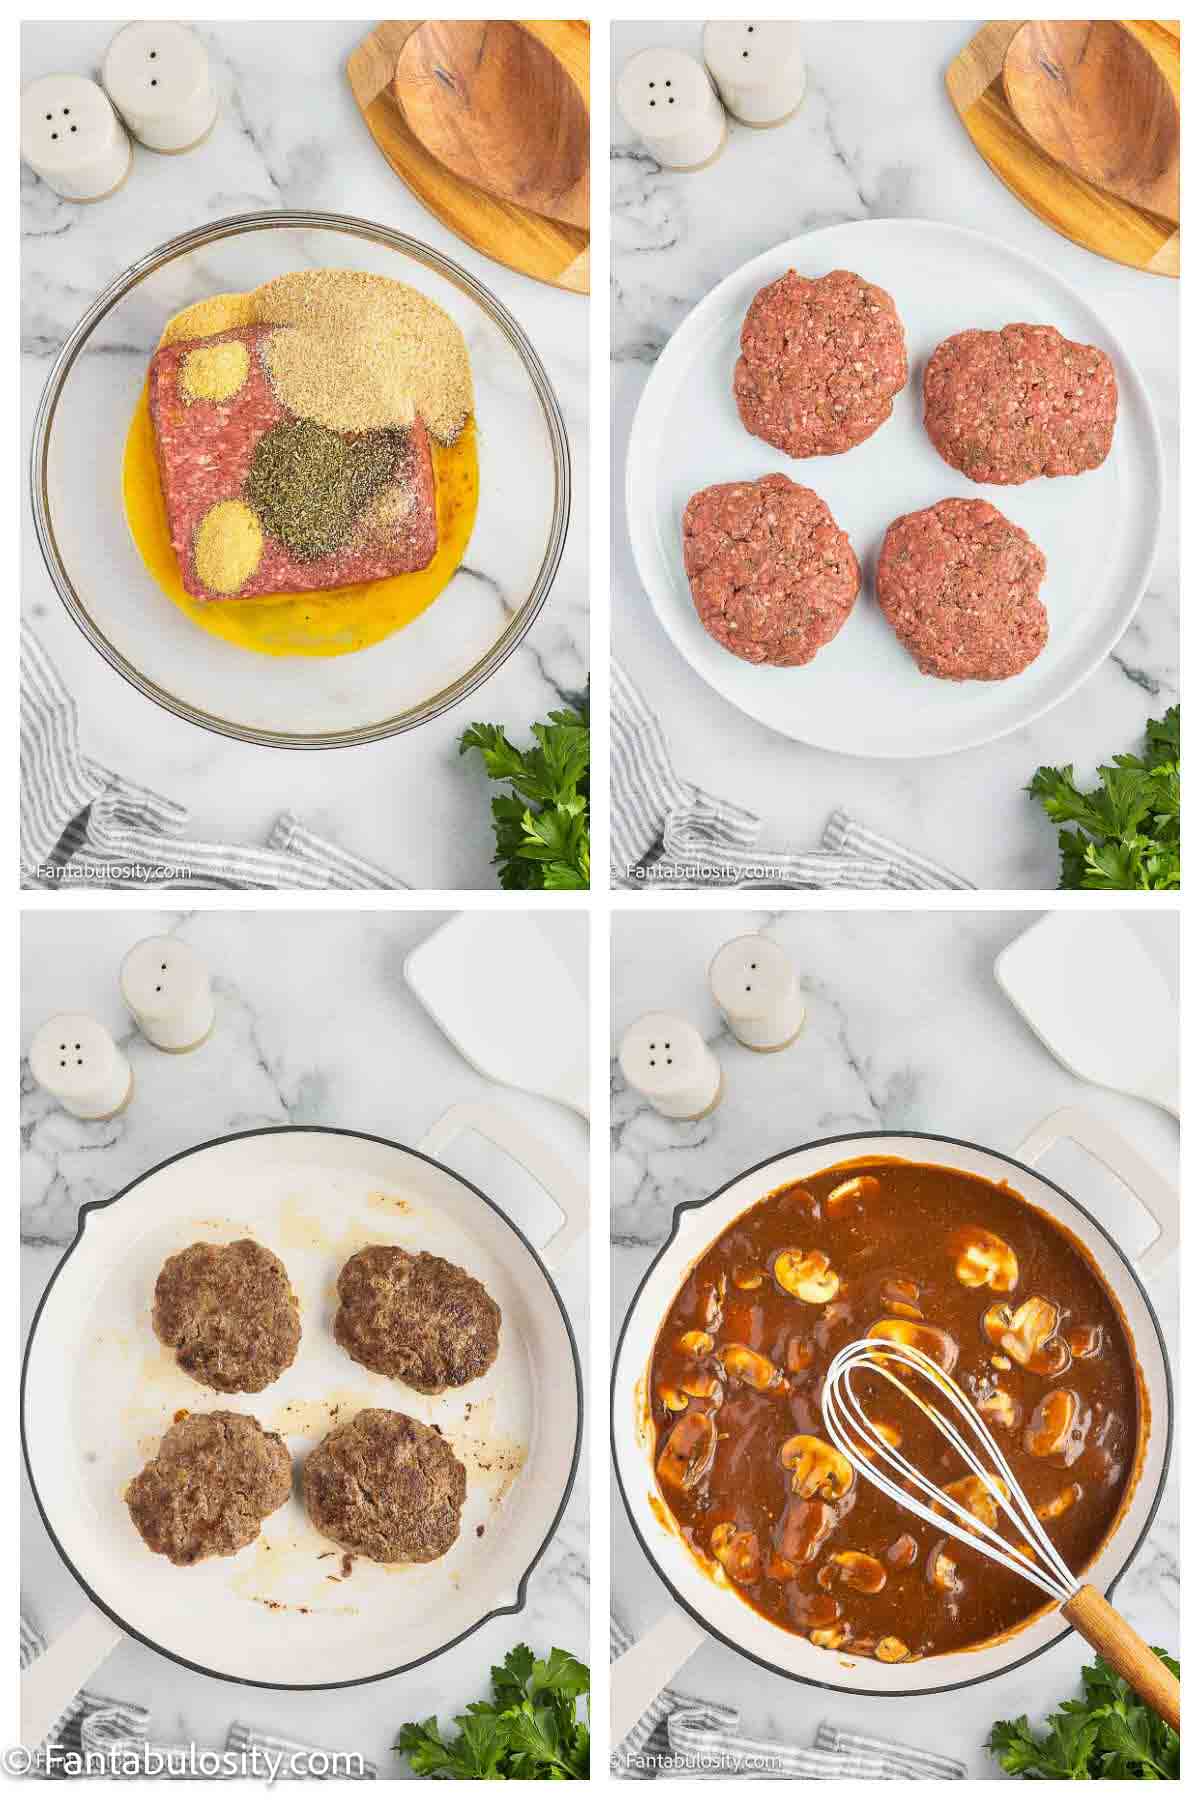 Process images for salisbury steak recipe, showing in an image collage.